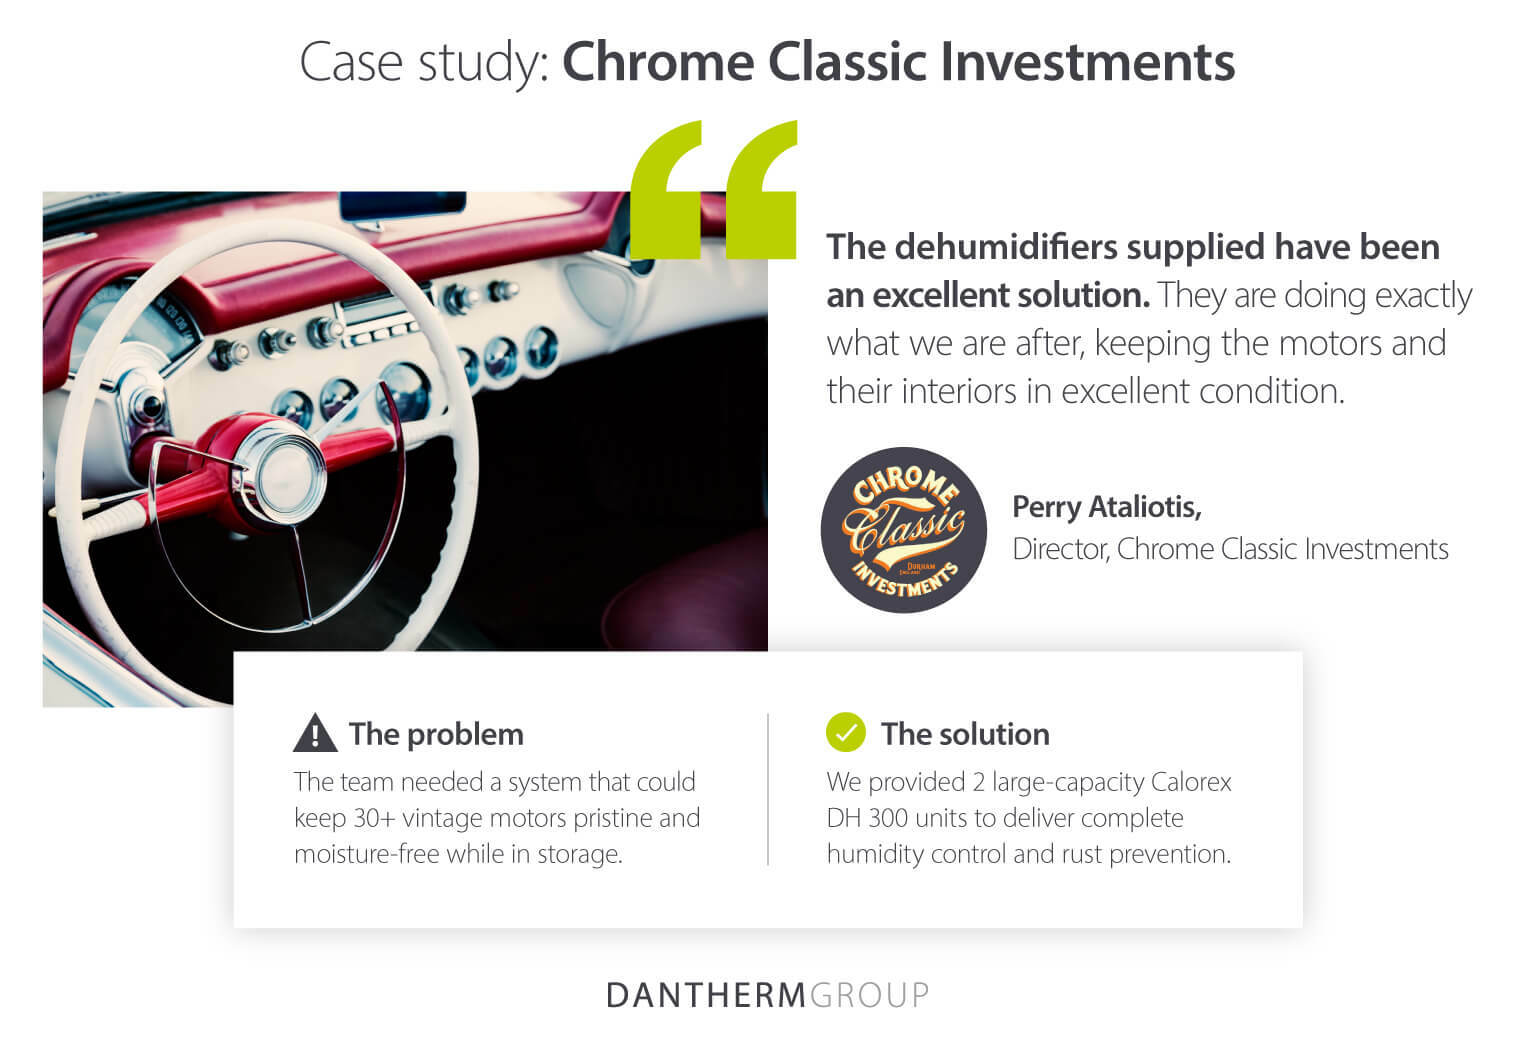 Case study: Chrome Classic Investments using dehumidifiers to keep 30+ classic cars moisture free